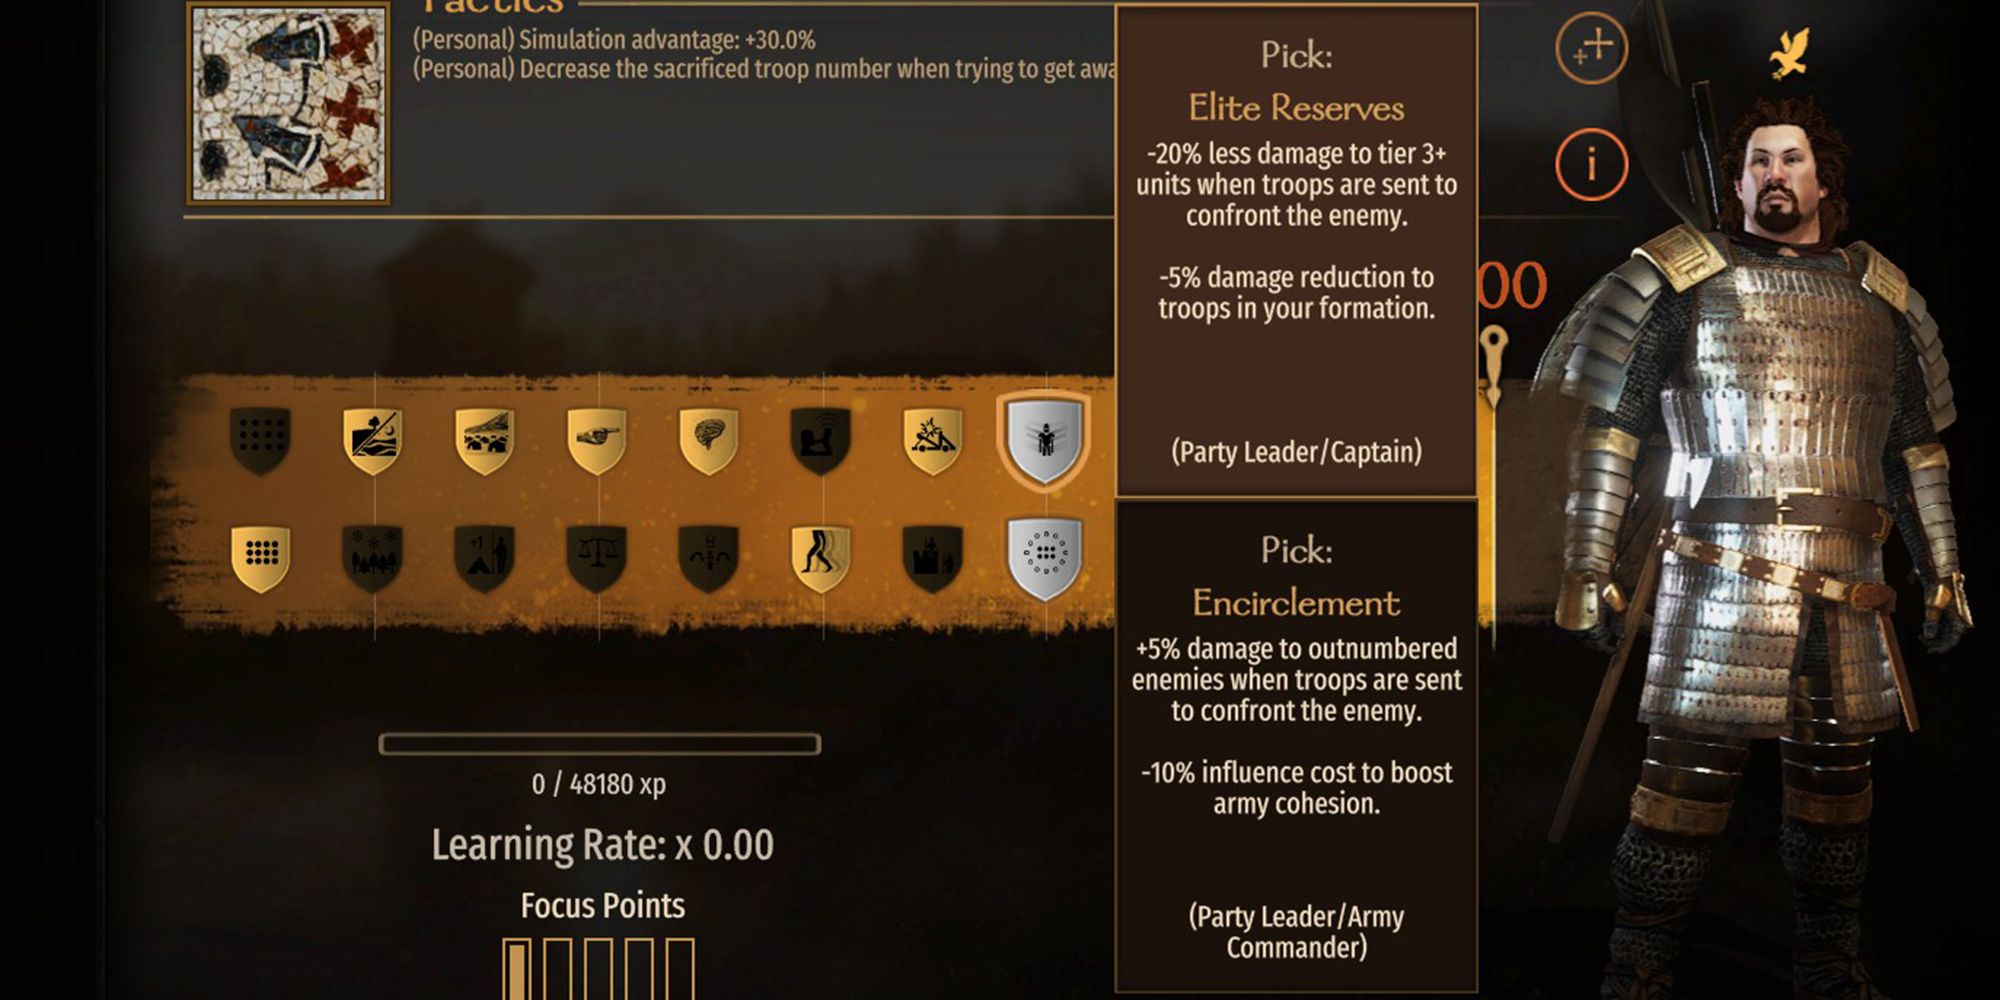 Tactics Elite Reserves Perk Menu Description When troops are sent to face an enemy, they take -20% less damage to Tier 3 and above units. -5% damage reduction to units in formation.